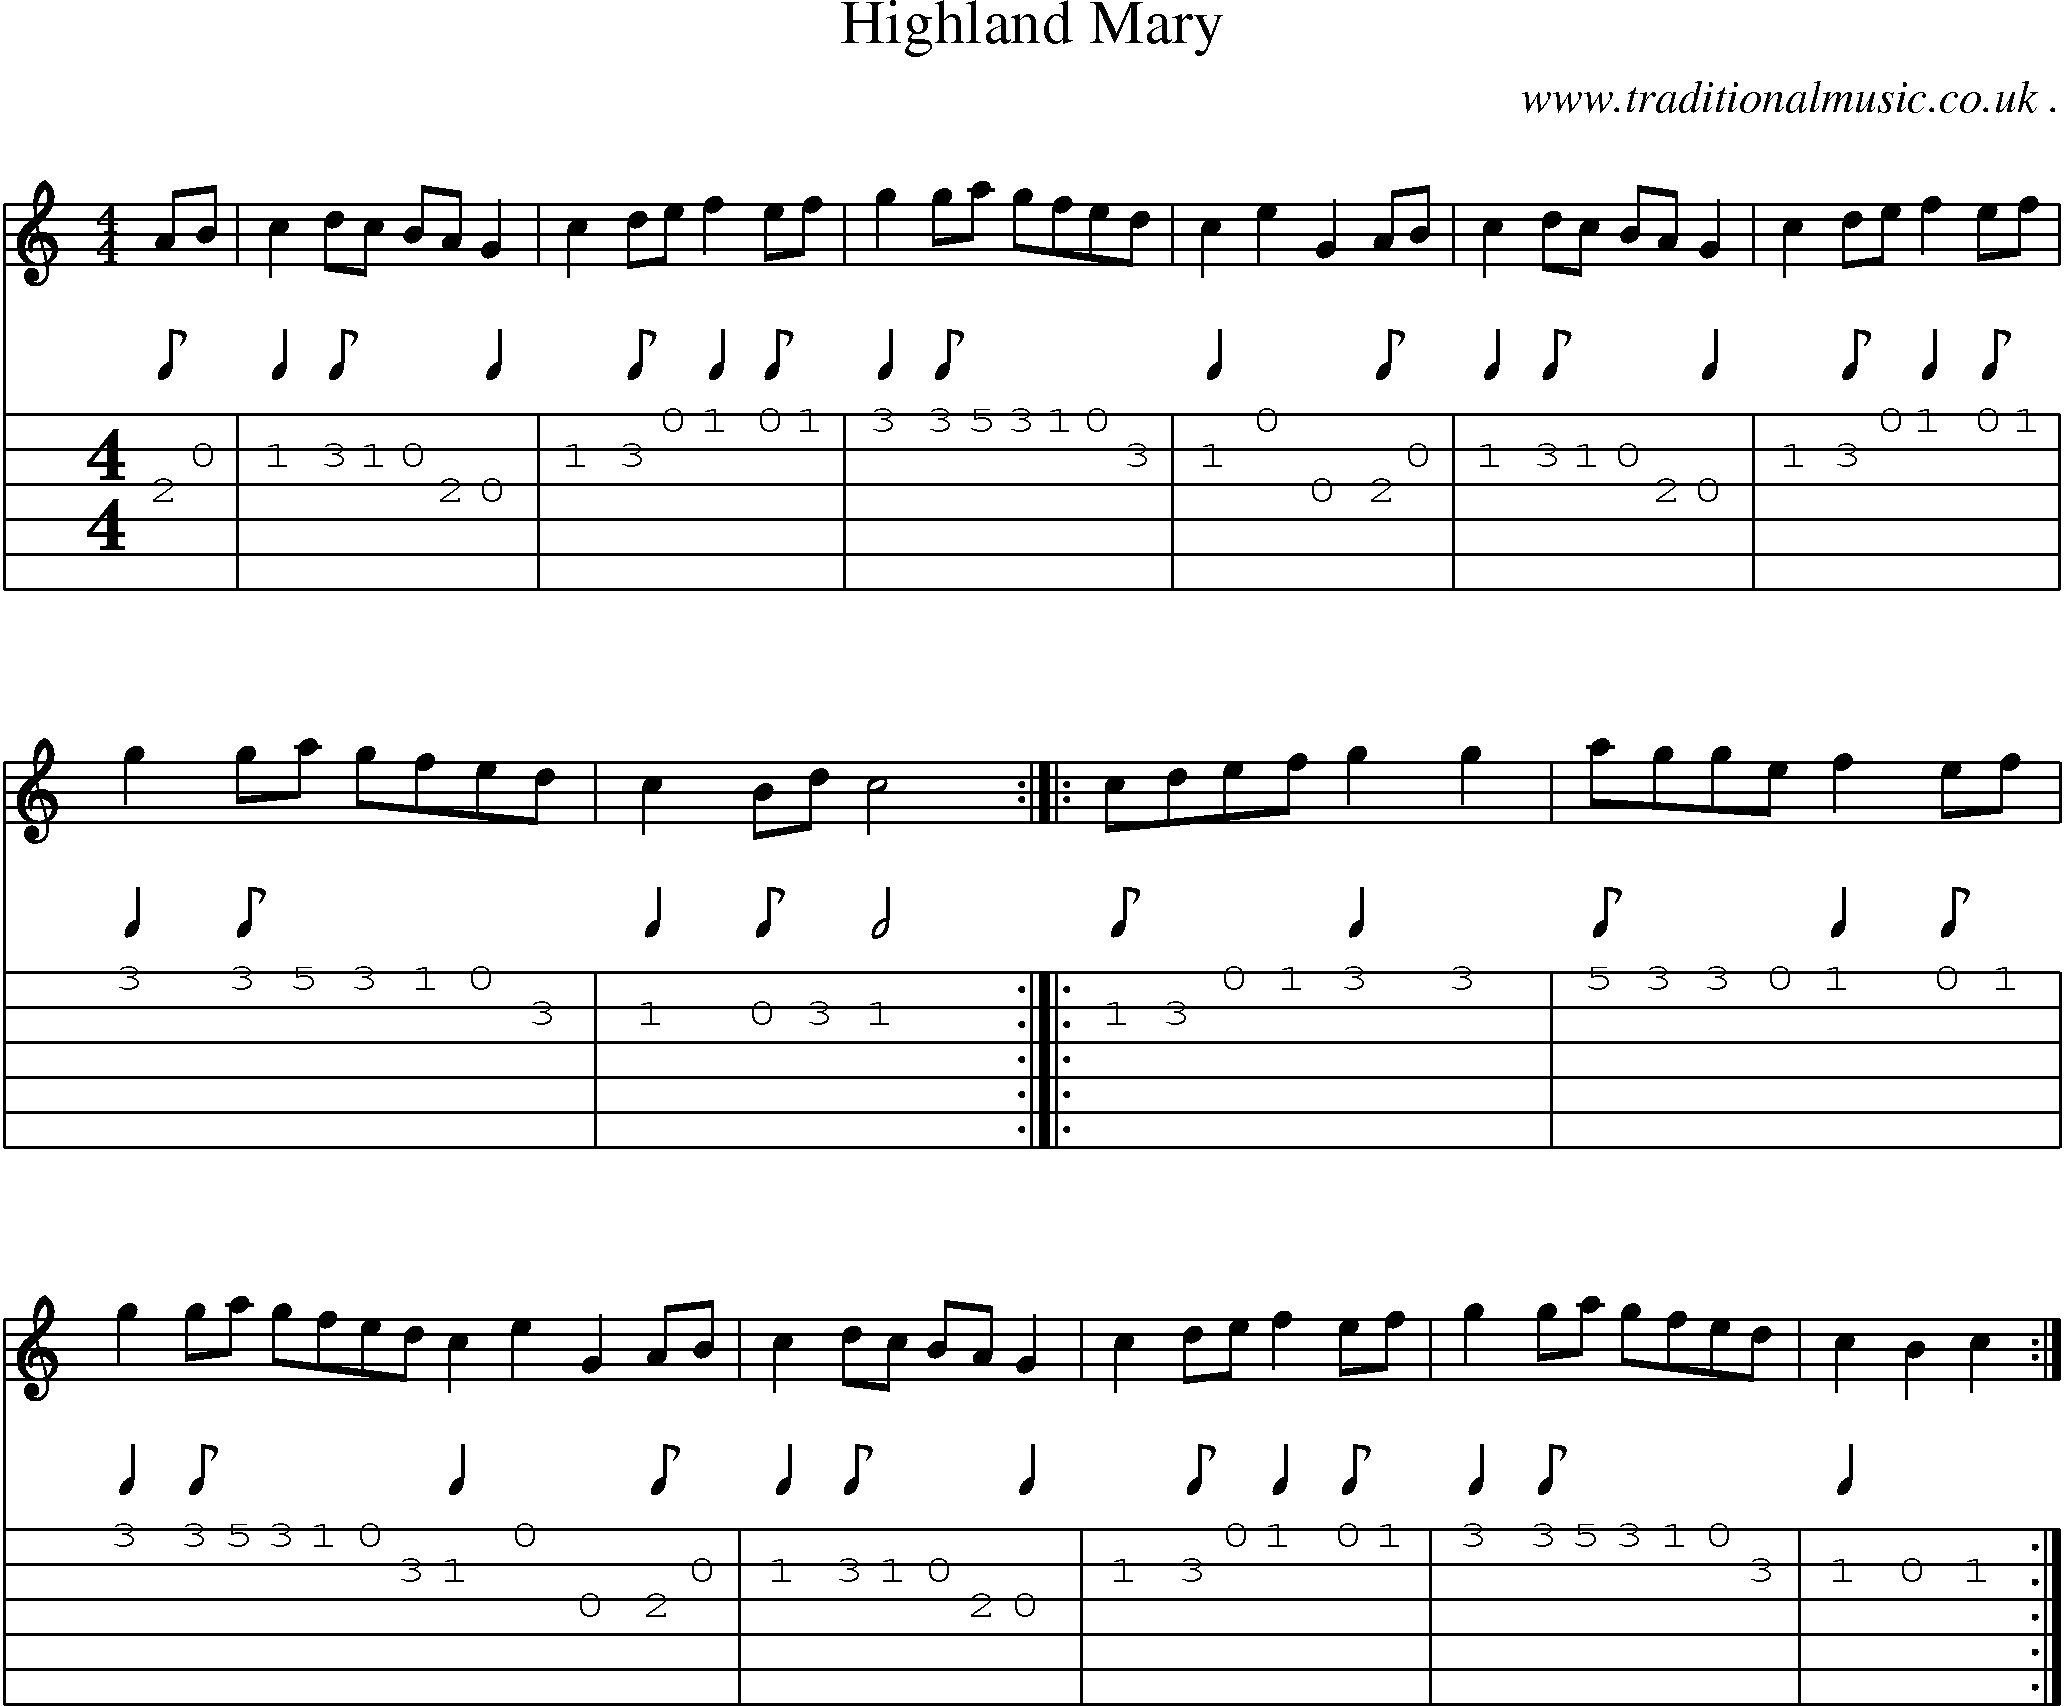 Sheet-music  score, Chords and Guitar Tabs for Highland Mary